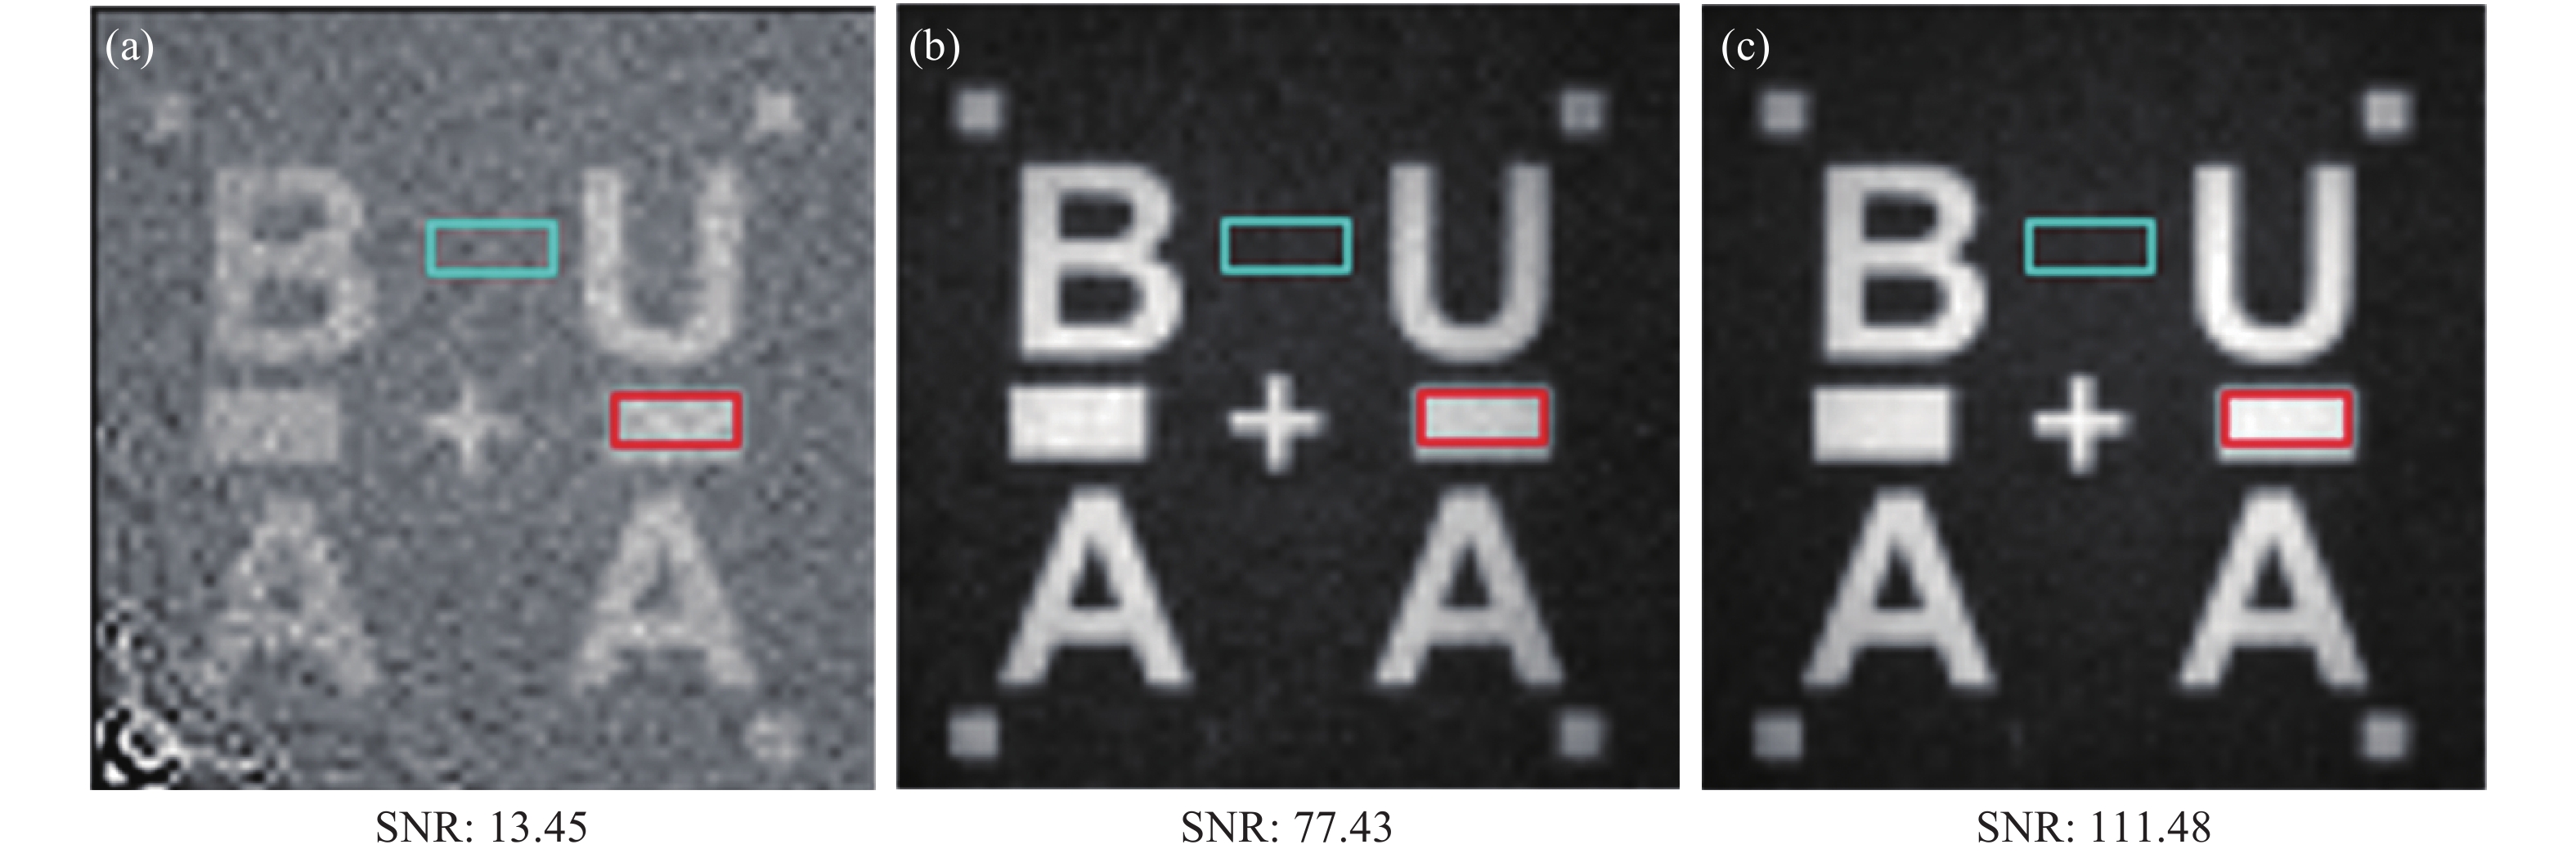 The signal-to-noise ratio of the reconstructed image in different modes (64×64 pixel up-sampled to 128×128 pixel). (a) Non-differential imaging; (b) Dual optical path differential imaging; (c) Dual optical path average noise reduction